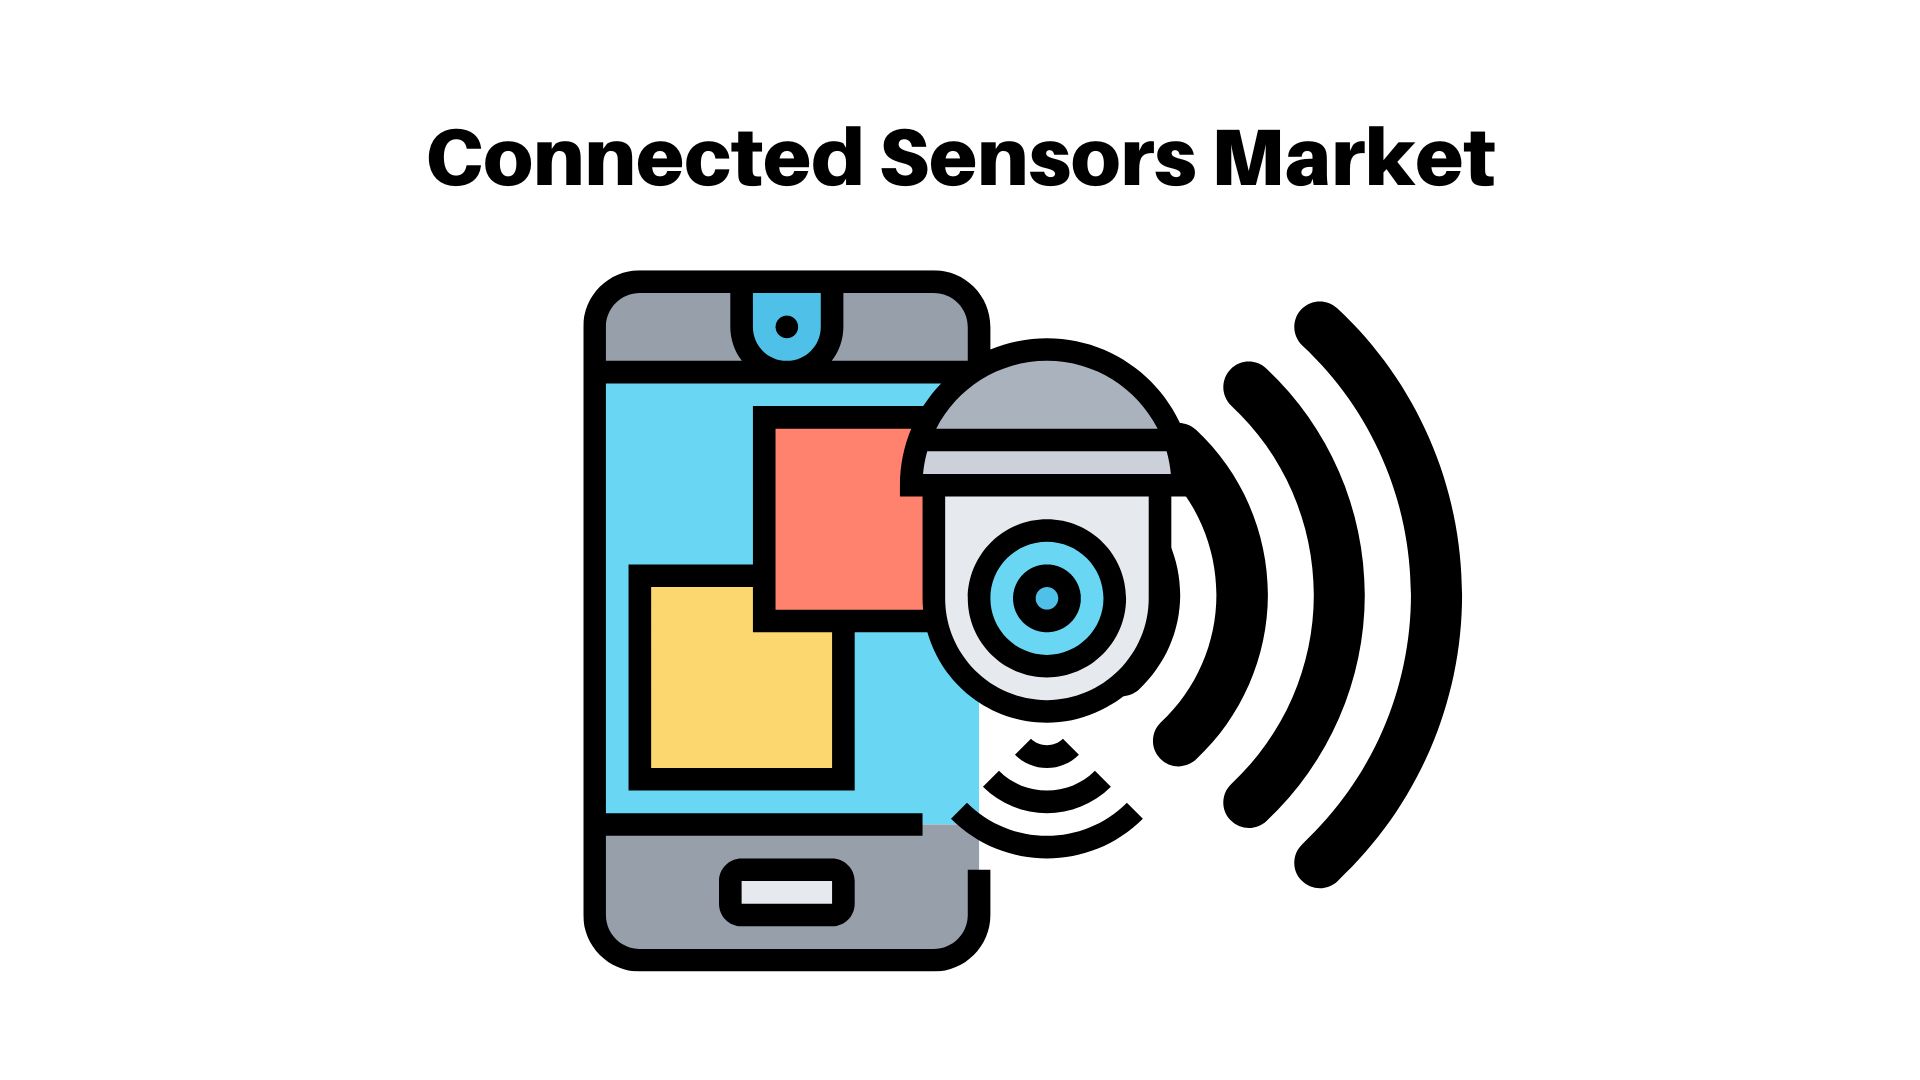 Connected Sensors Market Expanding At A CAGR Of 14.8% From 2022 To 2032